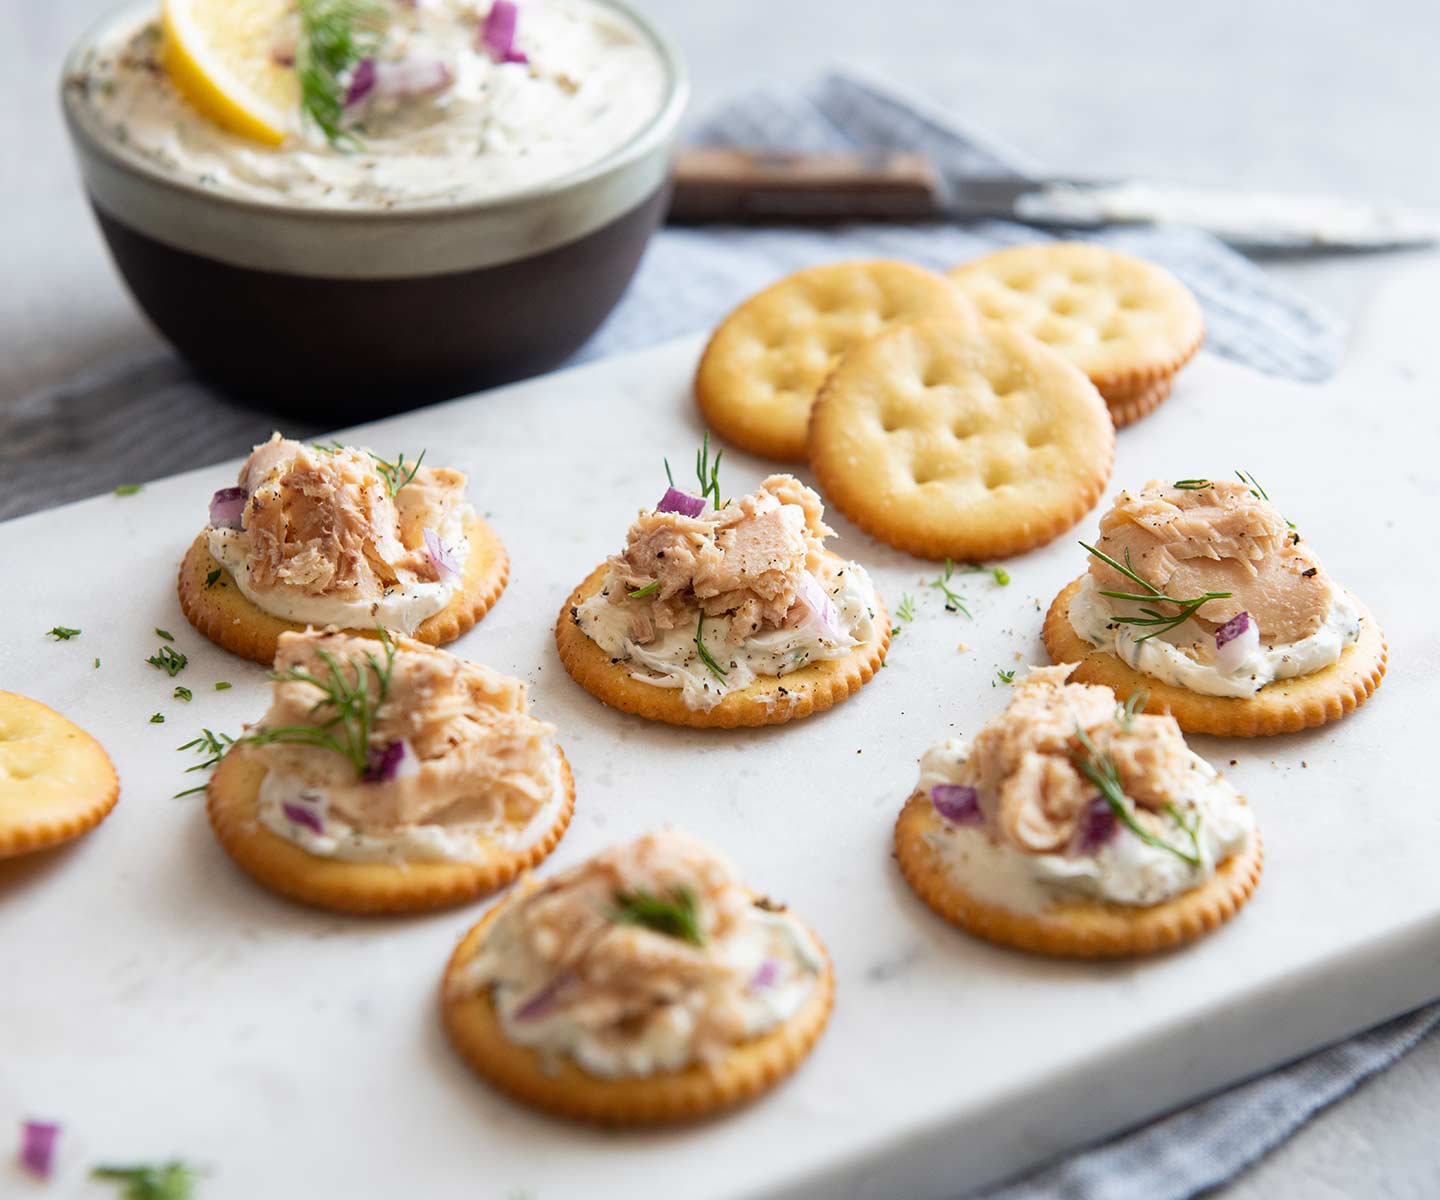 Best Cream Cheese Spread for Salmon